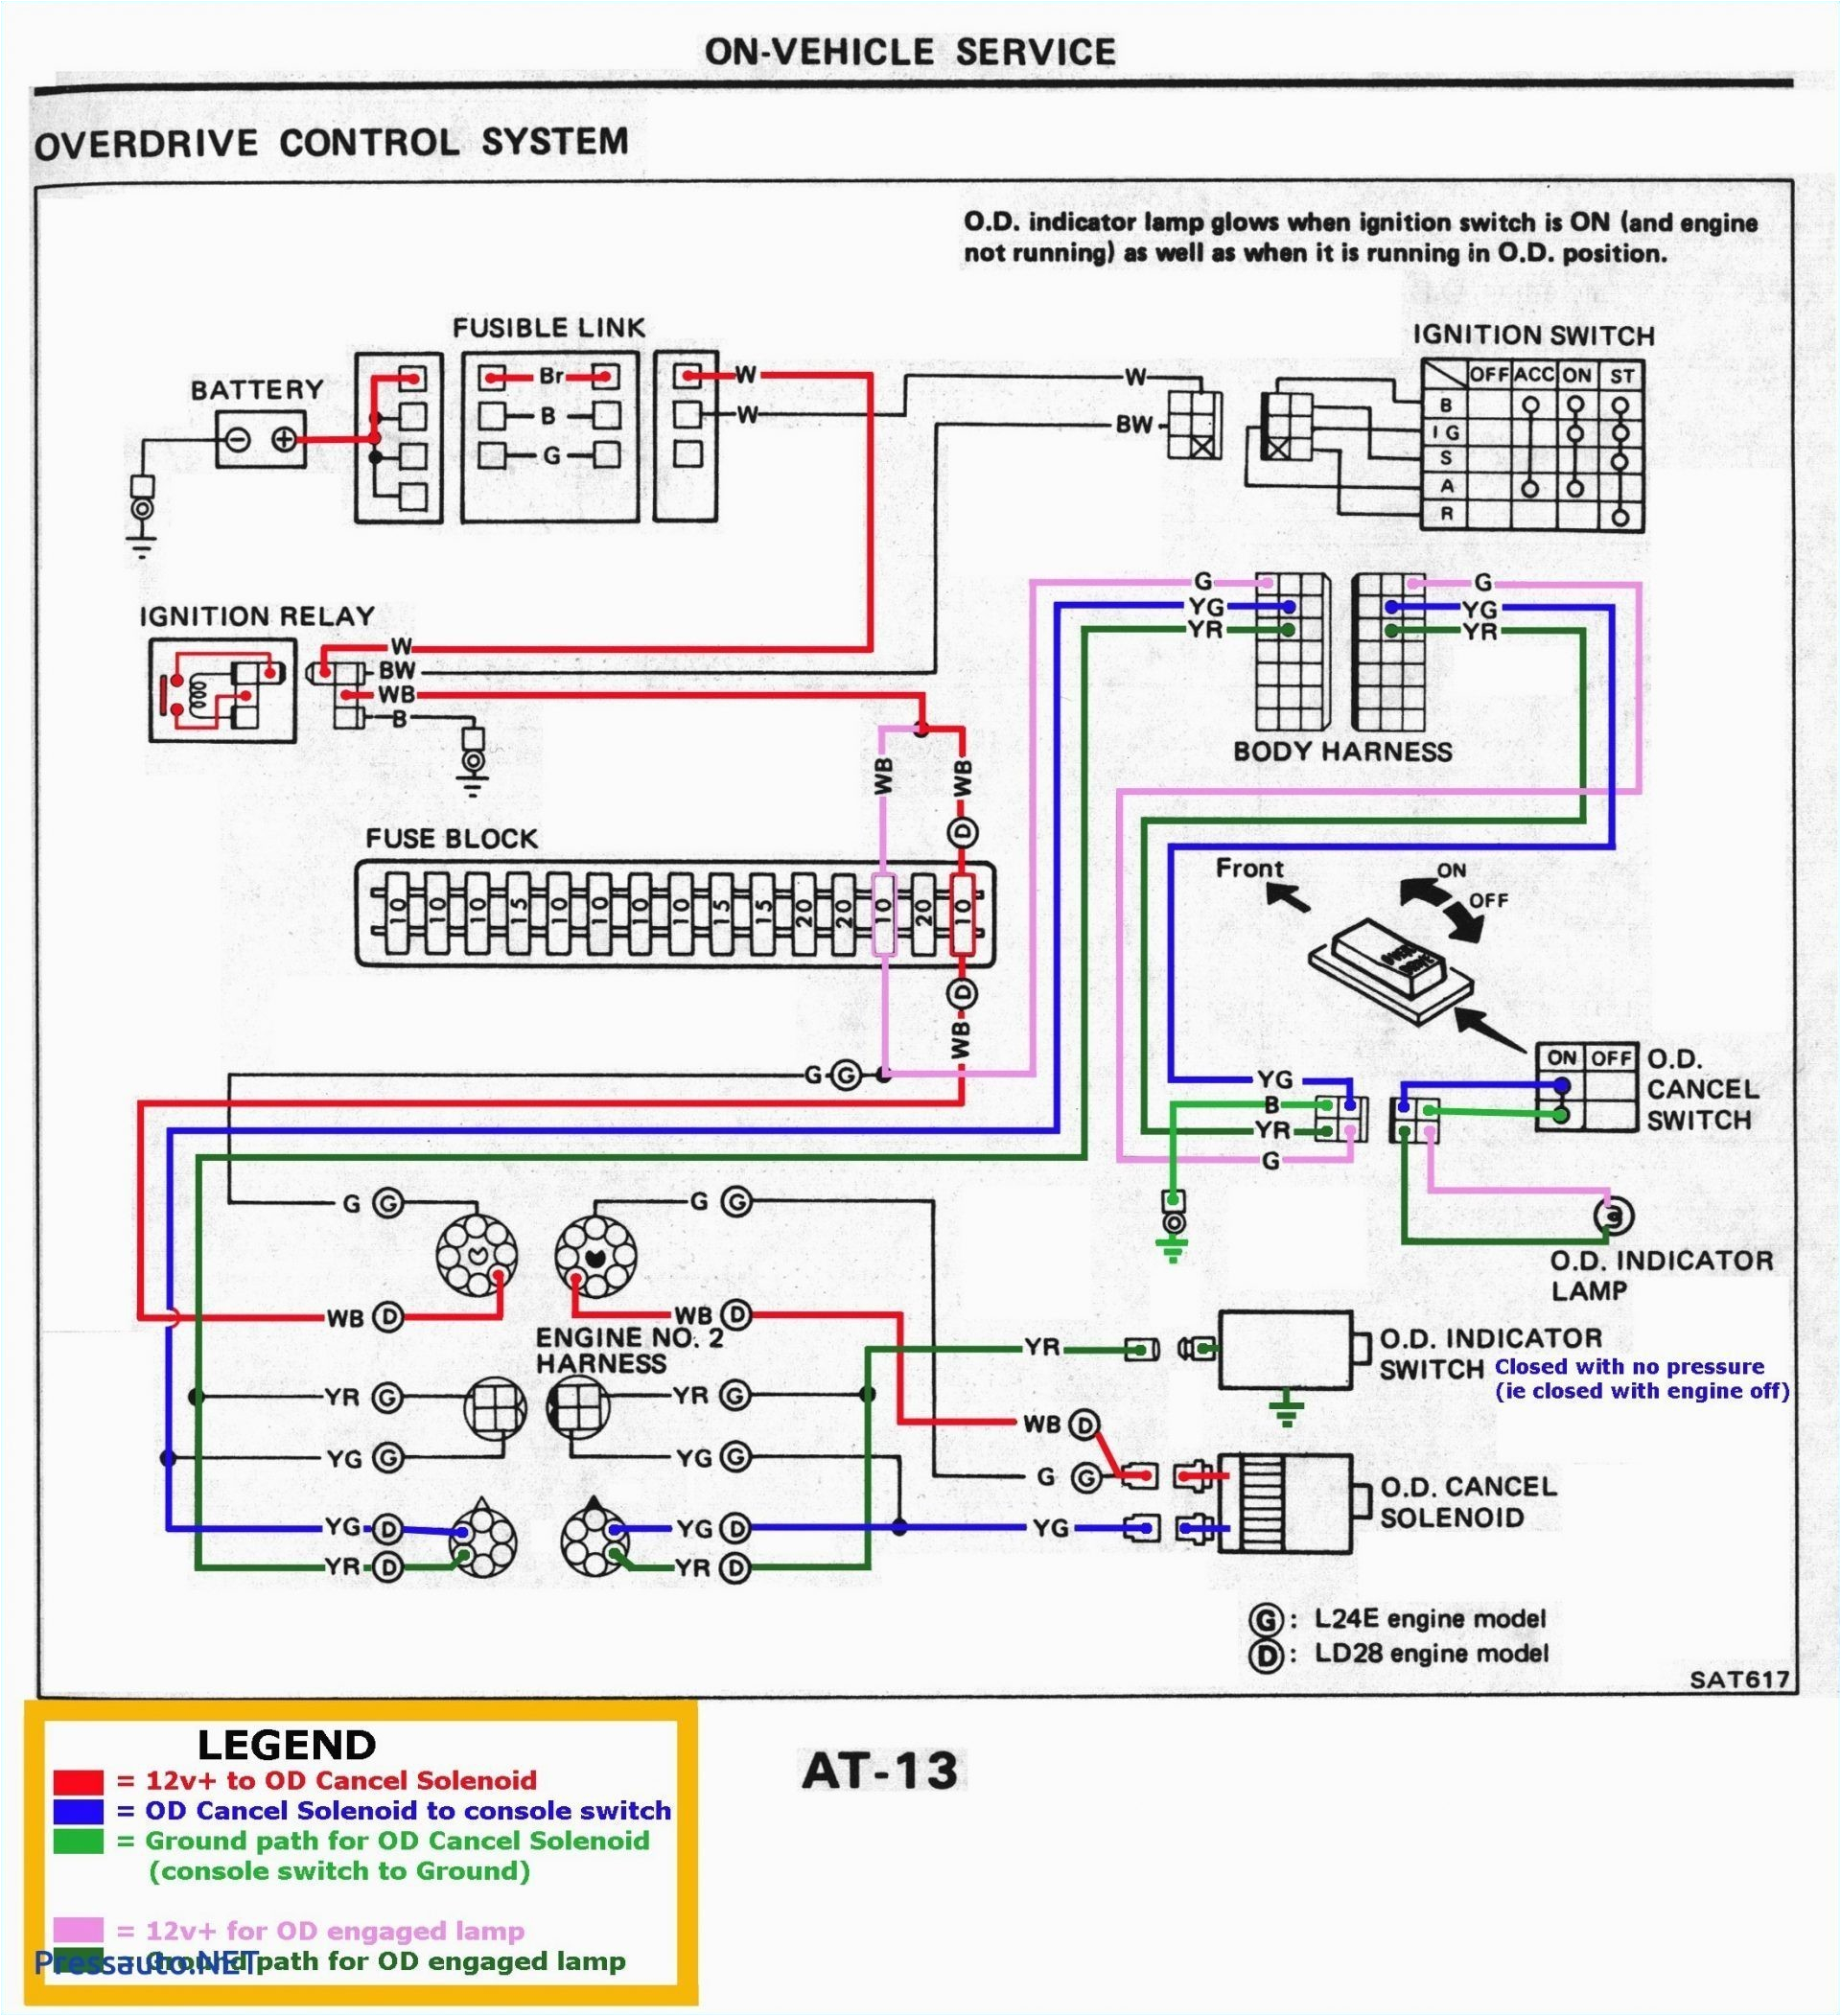 wiring harness questions blog wiring diagram catia wiring harness interview questions